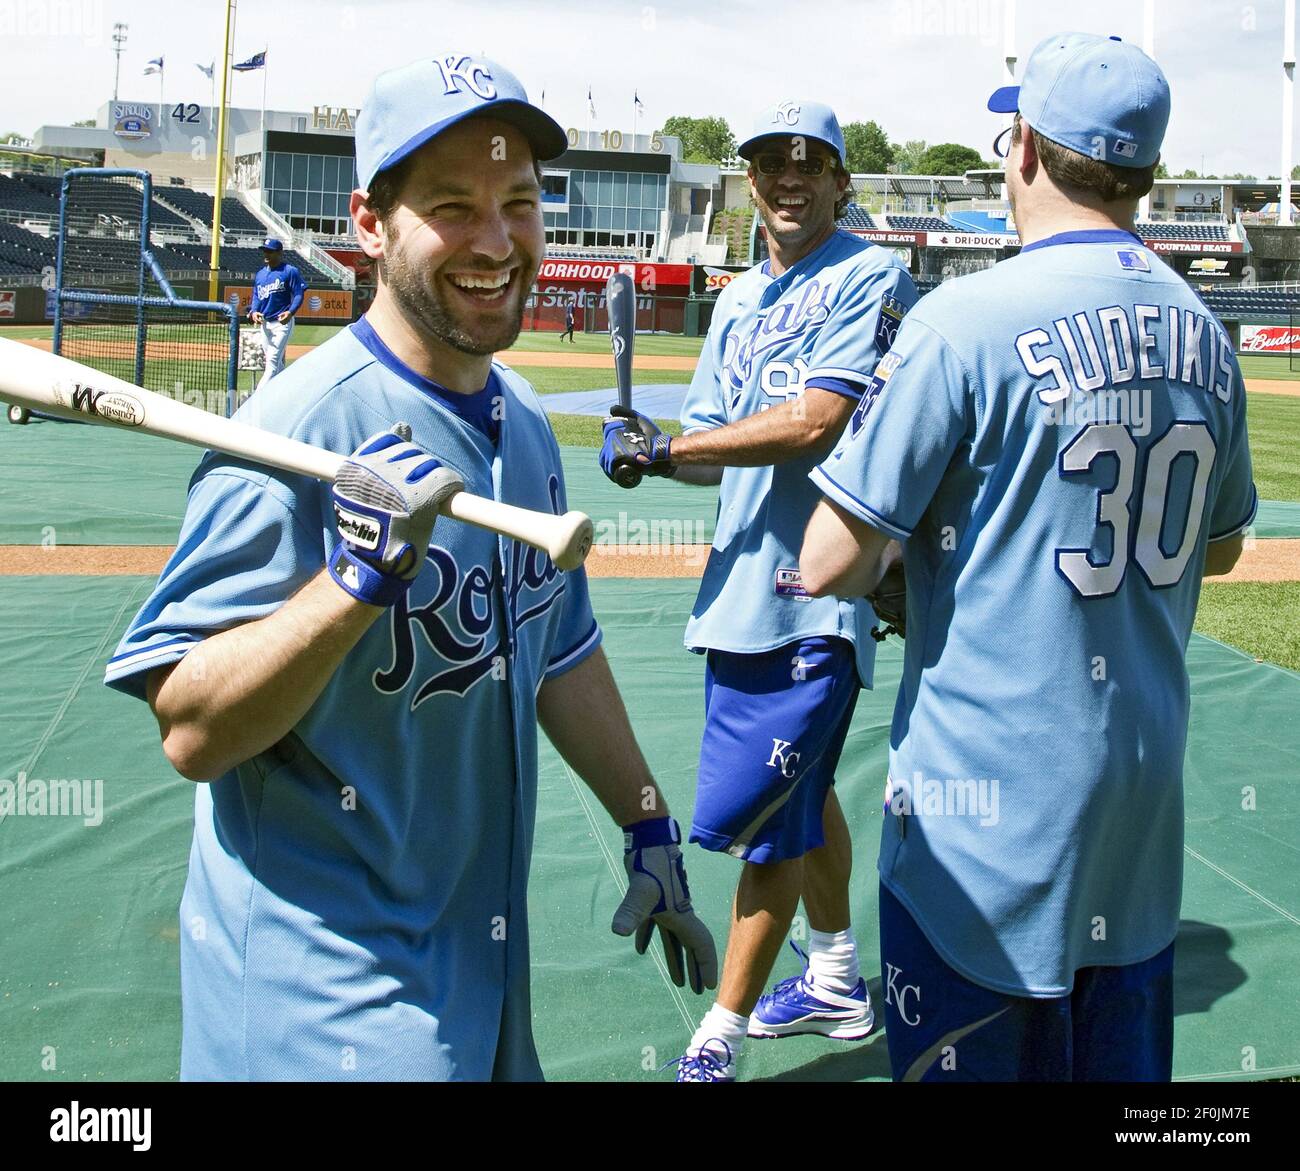 Comedian Paul Rudd, left, put on a Kansas City Royals shirt and took a  little batting practice before the Royals team took the field for its own  practice before the game against